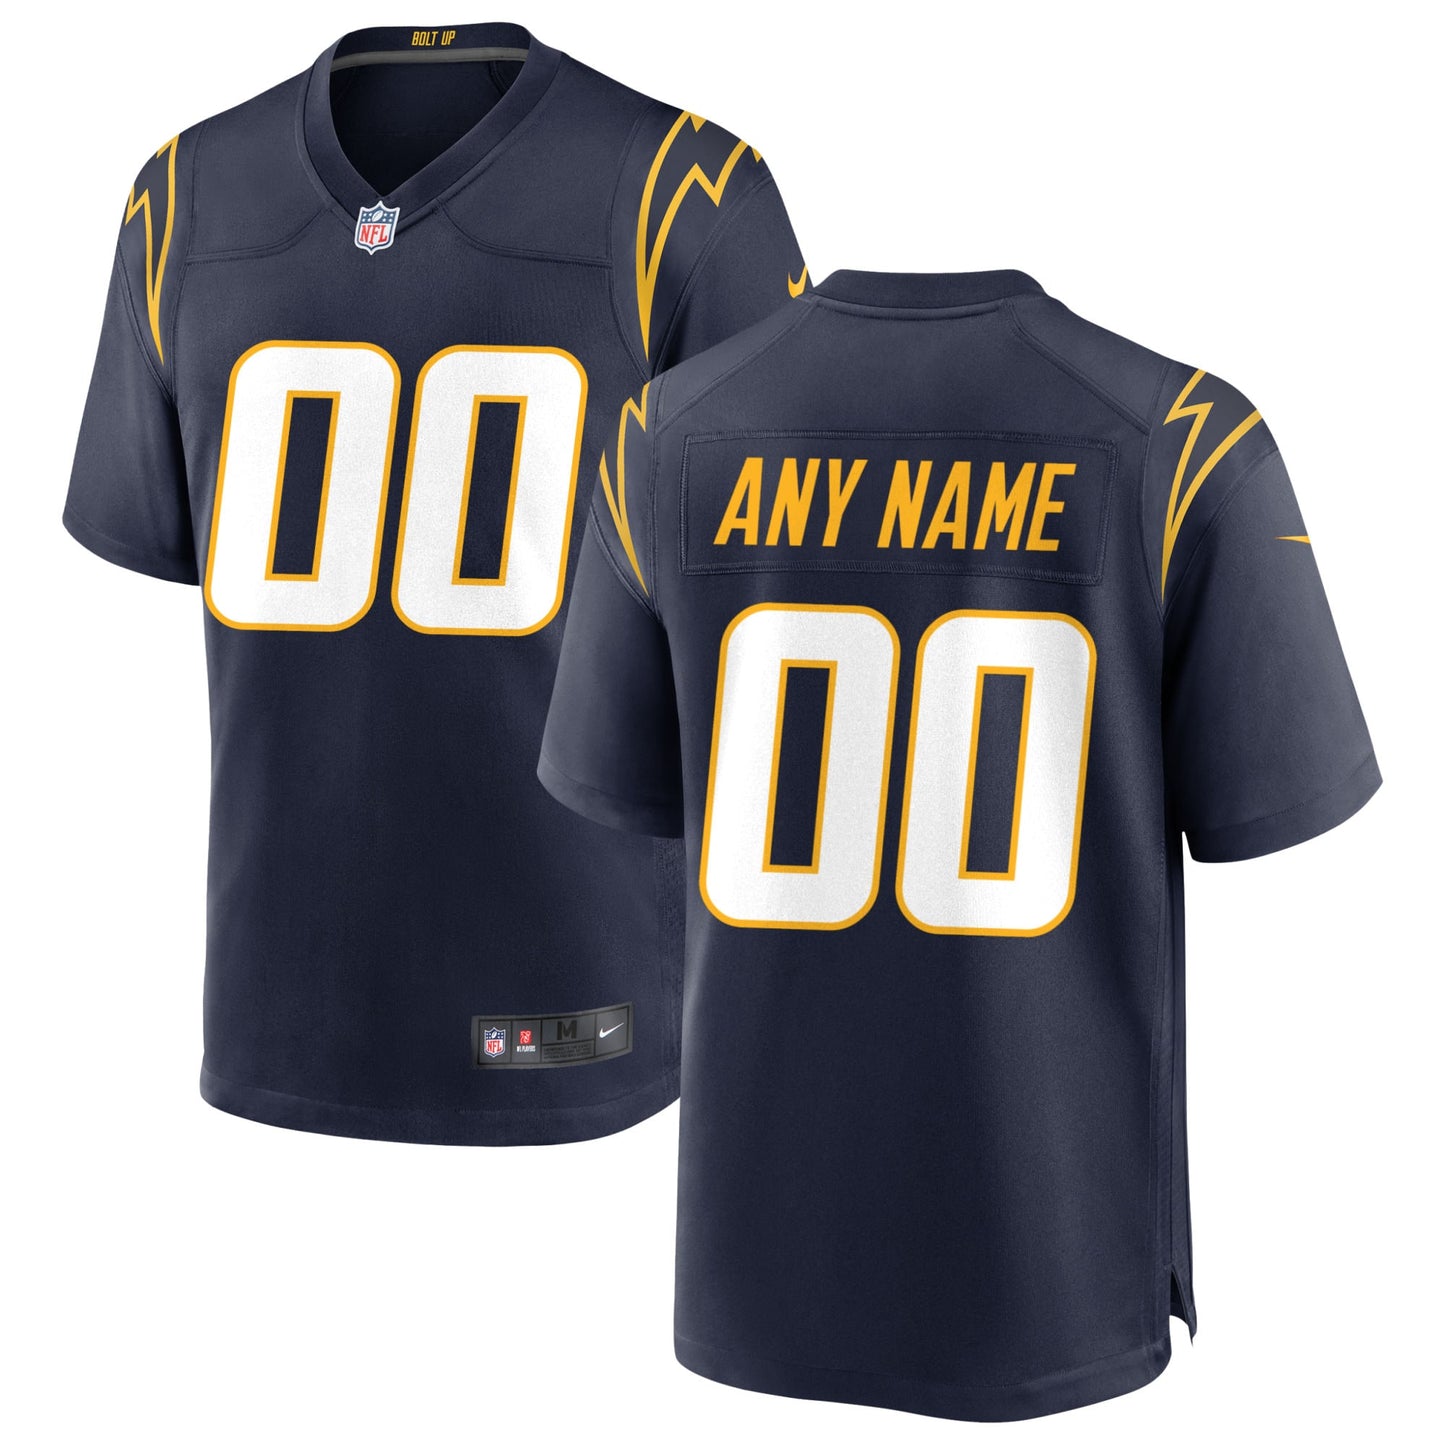 Los Angeles Chargers Nike Alternate Custom Game Jersey - Navy